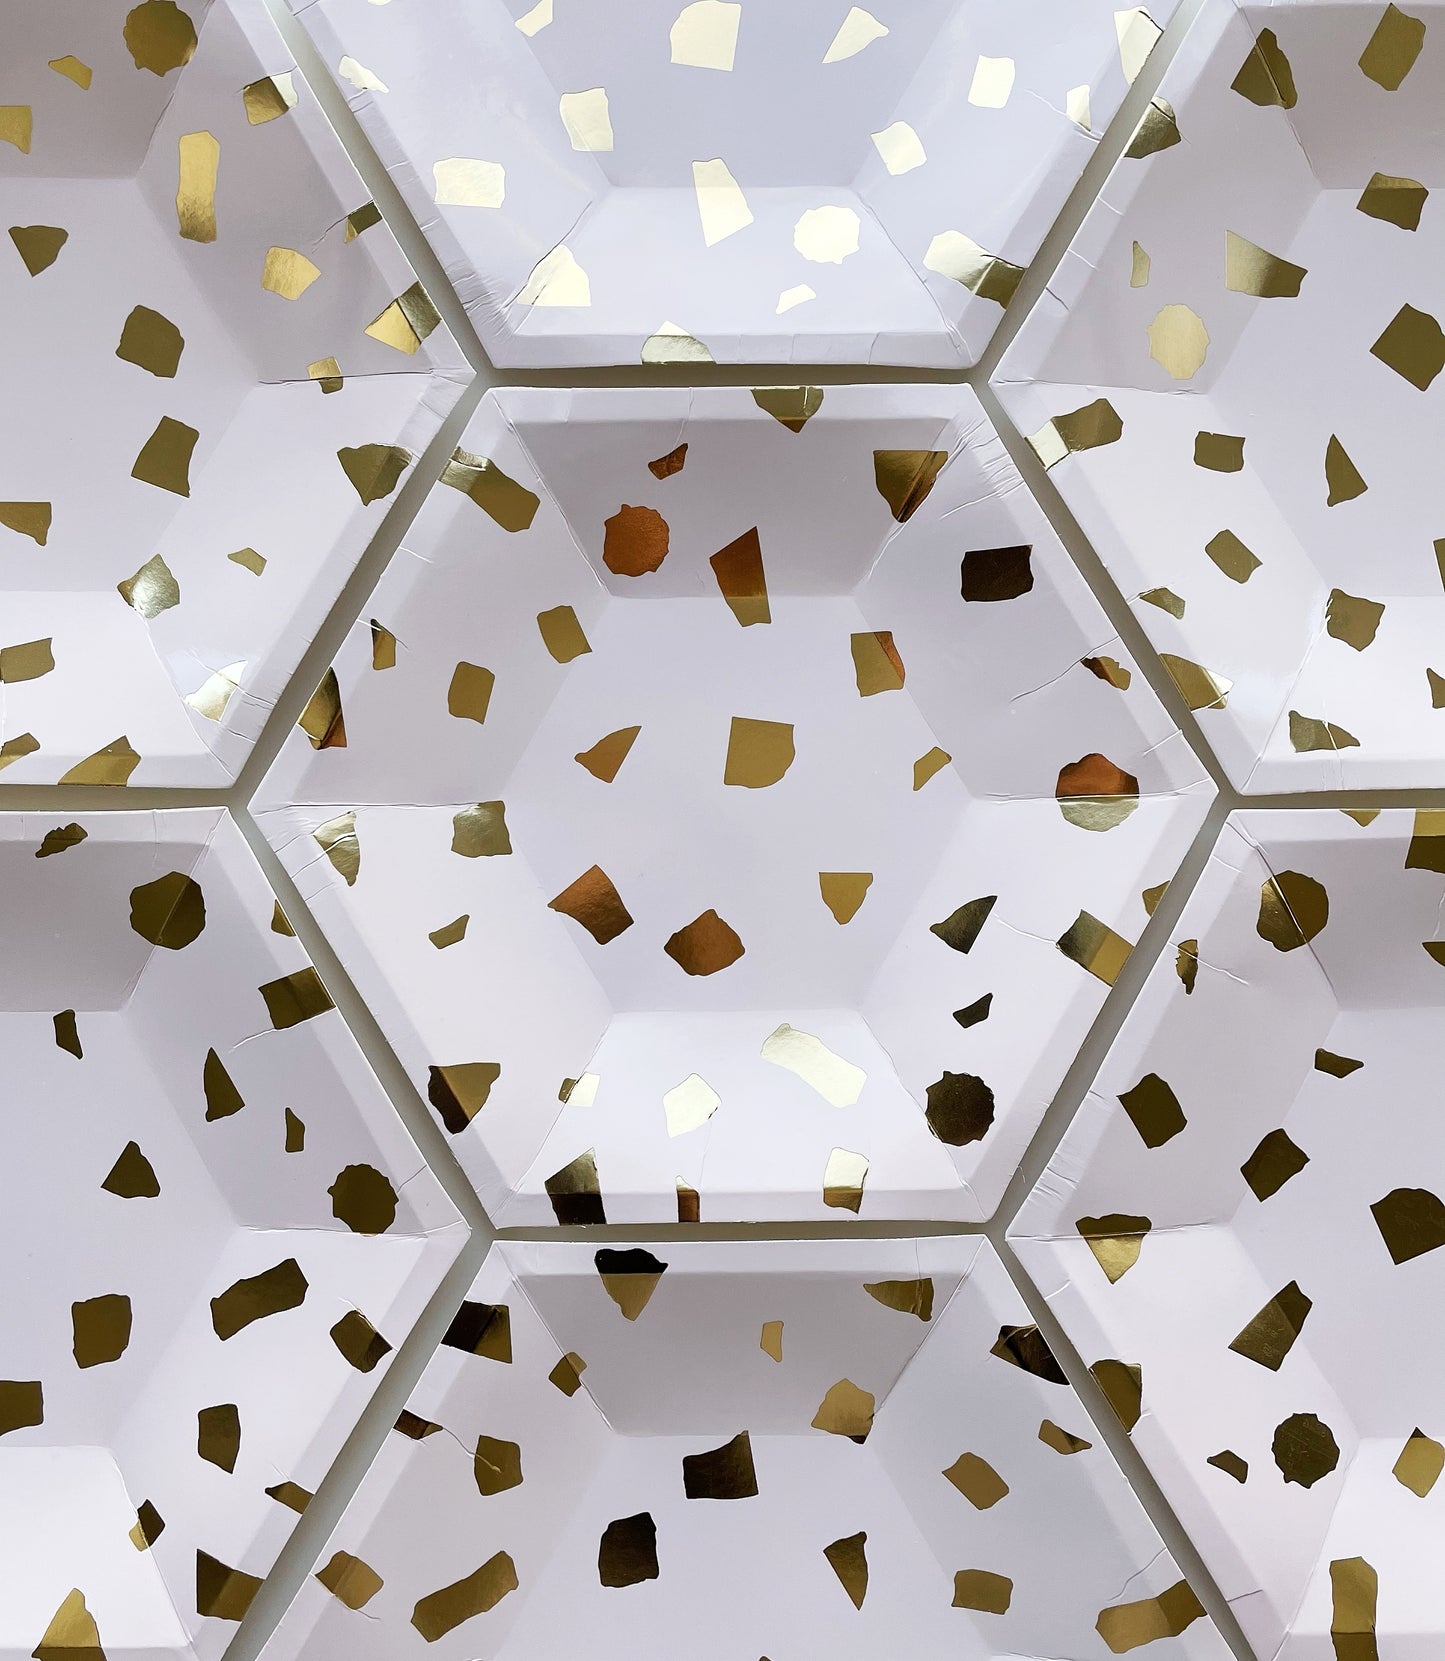 The large paper party plates are in the shape of a hexagon. The plates are a pale blush pink colour with gold foil detail. This image shows multiple plates.